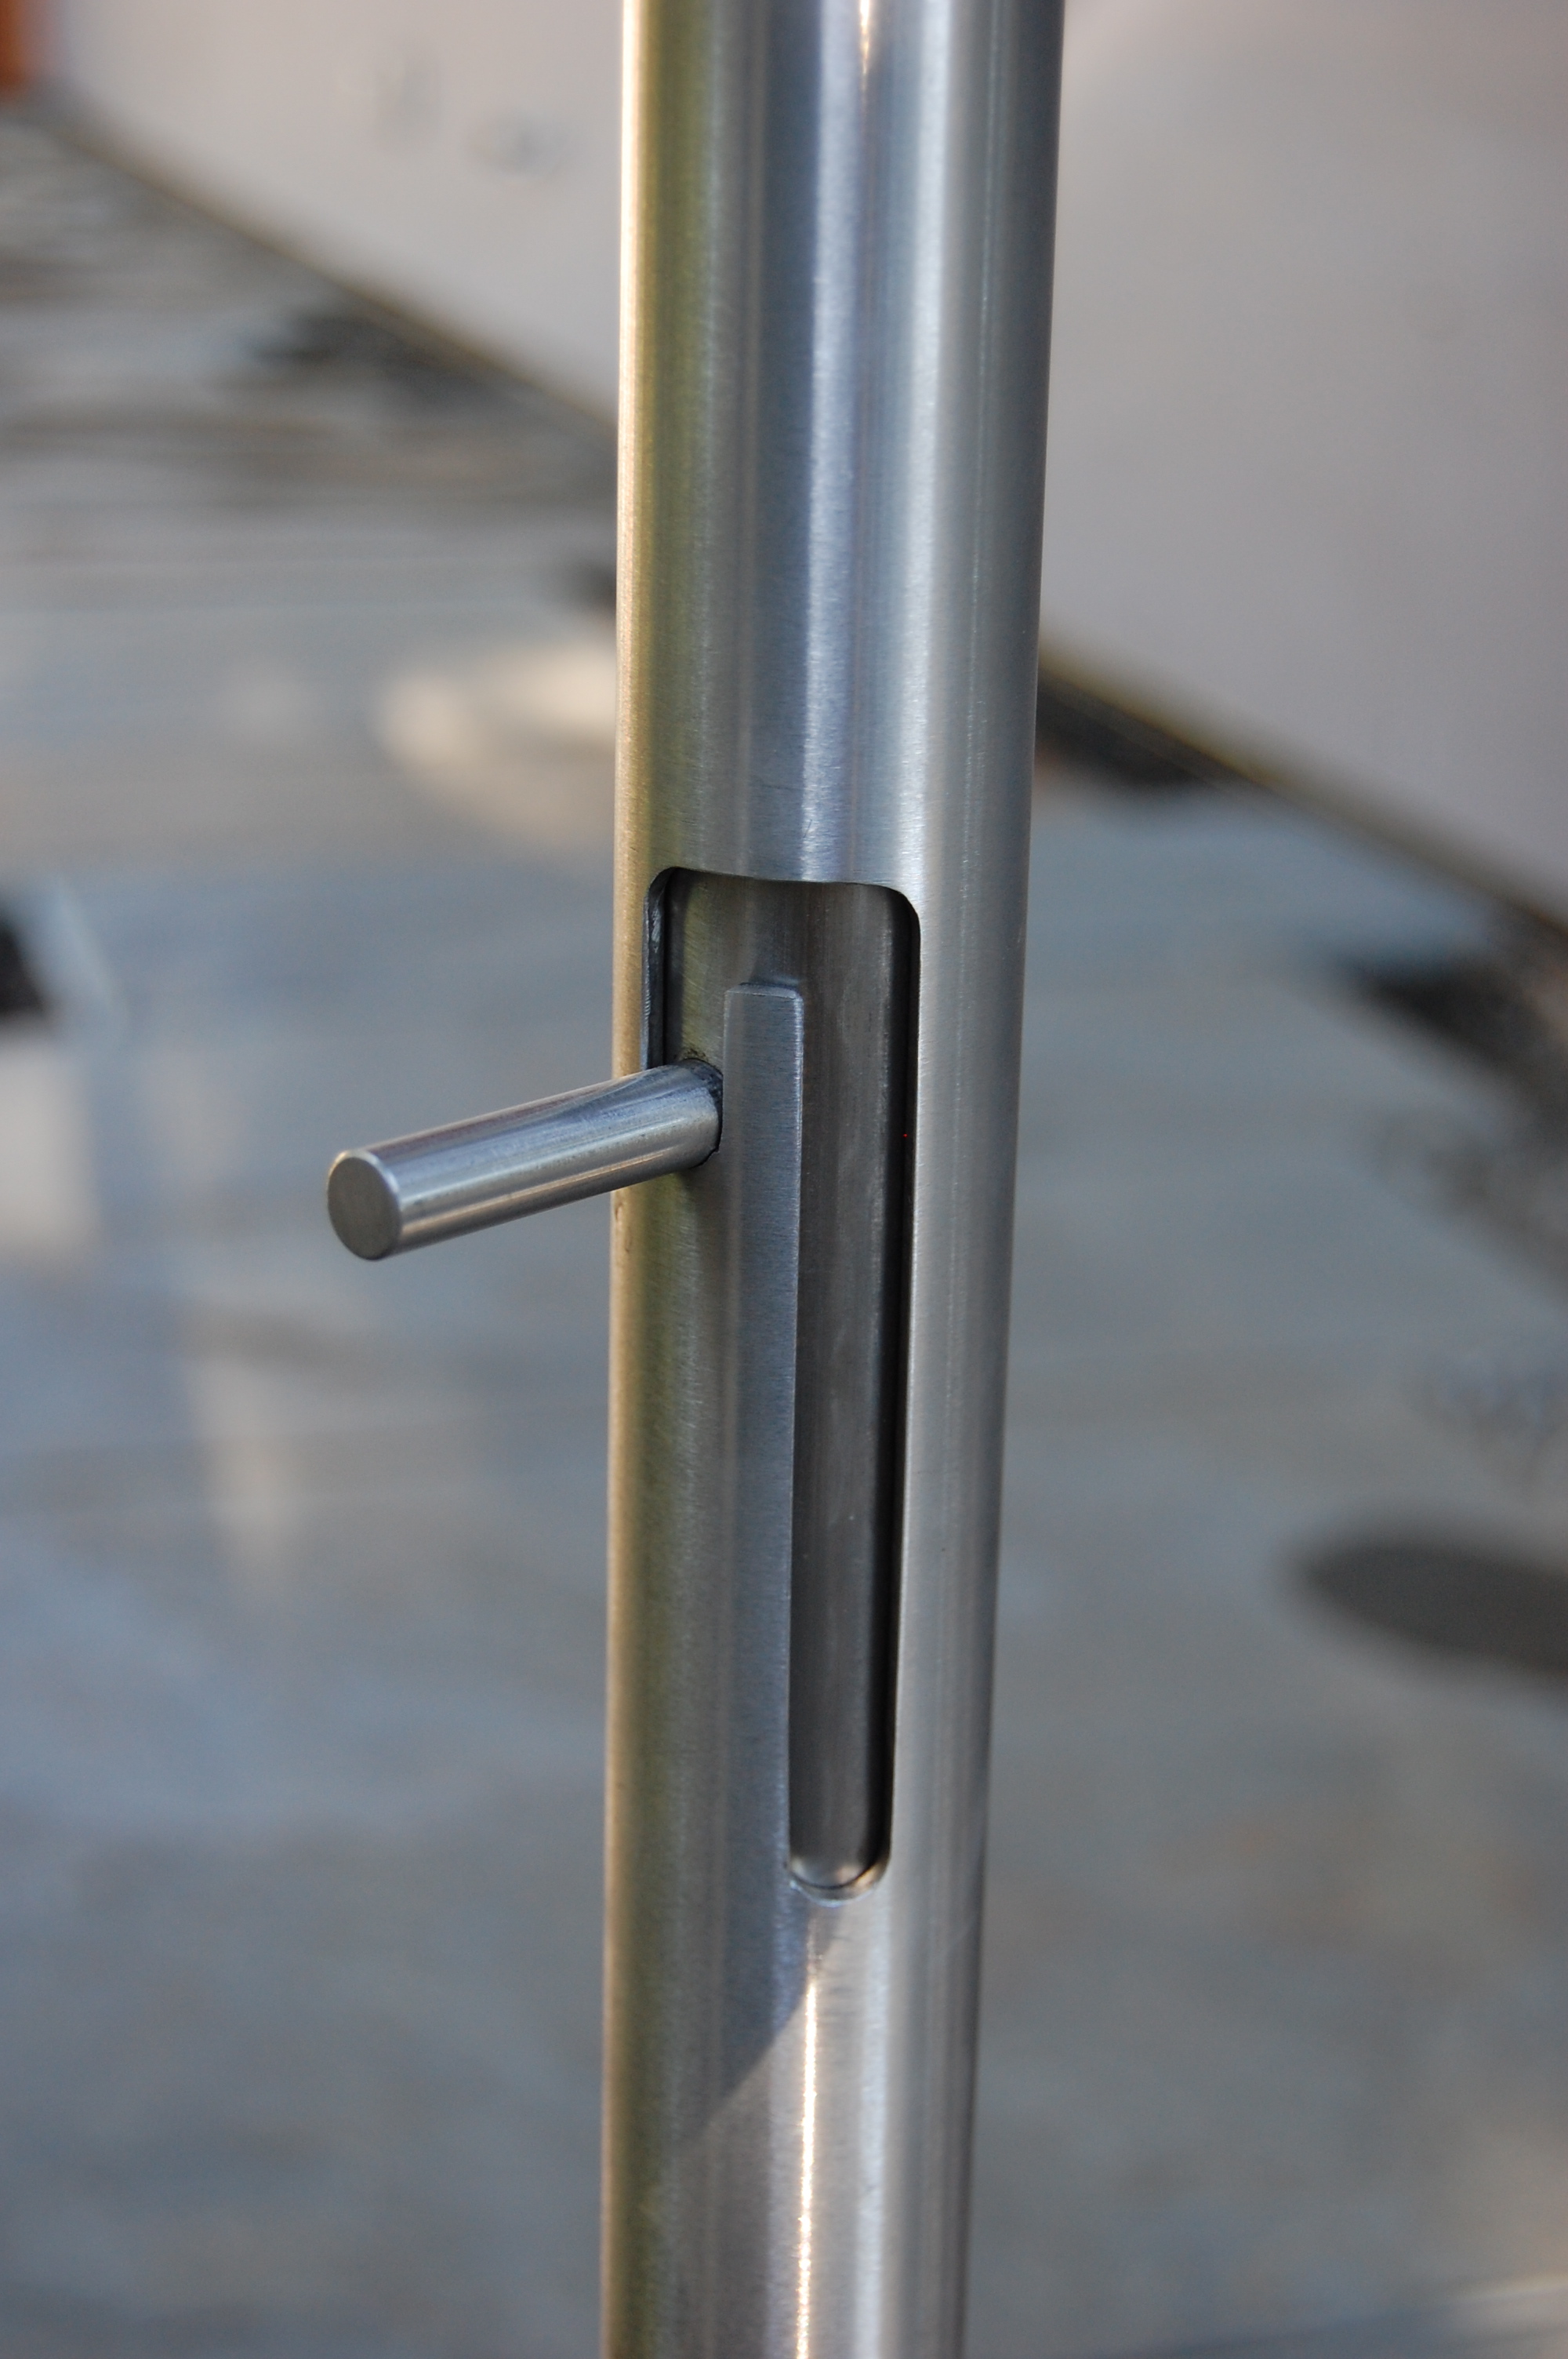  Integrated cane bolt housed in a door handle for a gate. All Stainless steel  Designed by Formed Objects 